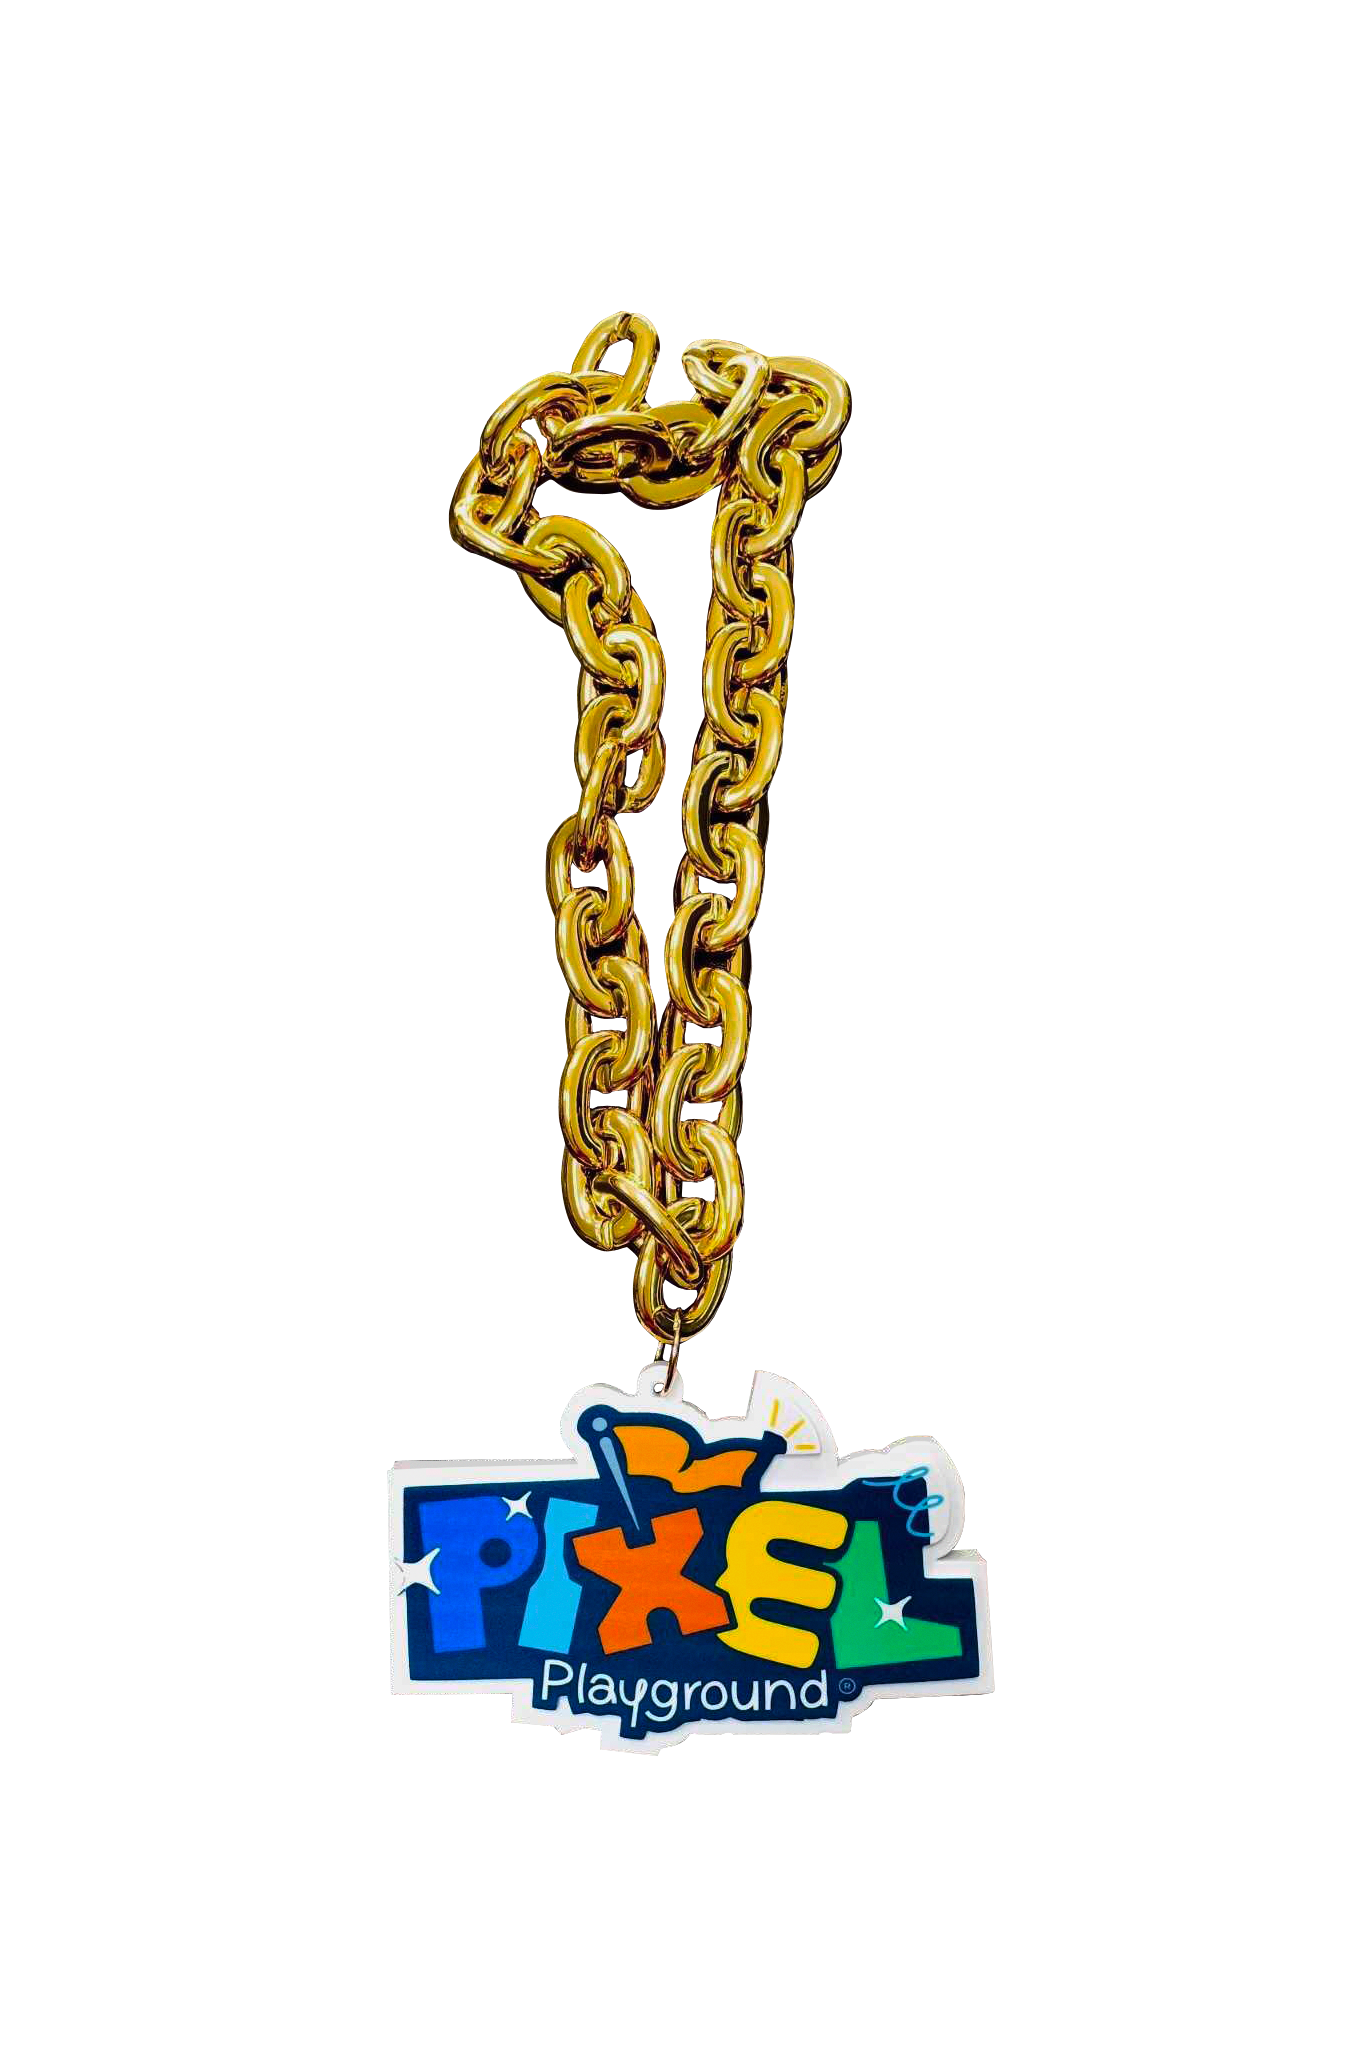 Golden chain with the Pixel Playground logo attached to it.